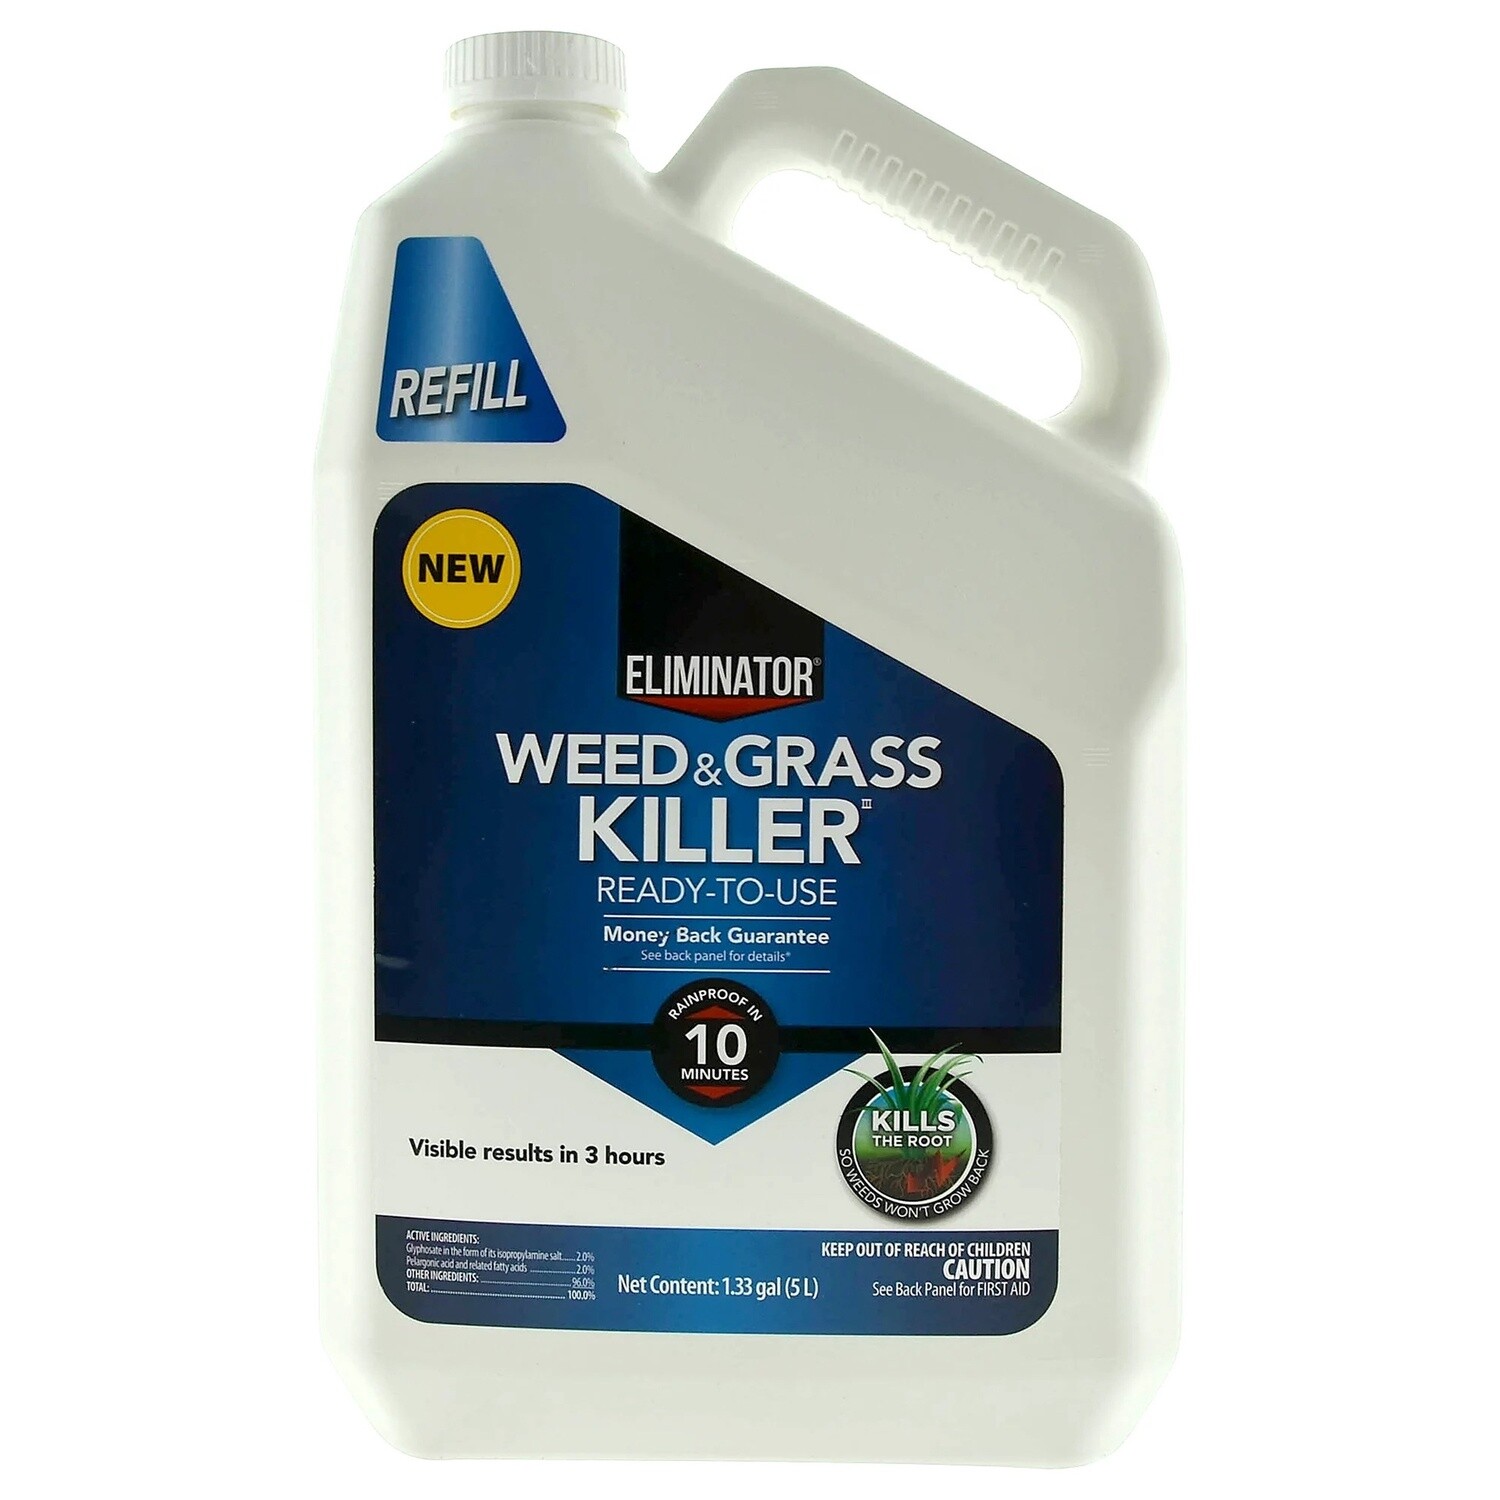 Eliminator Weed & Grass Killer Refill Ready-to-Use 1.33-Gallon